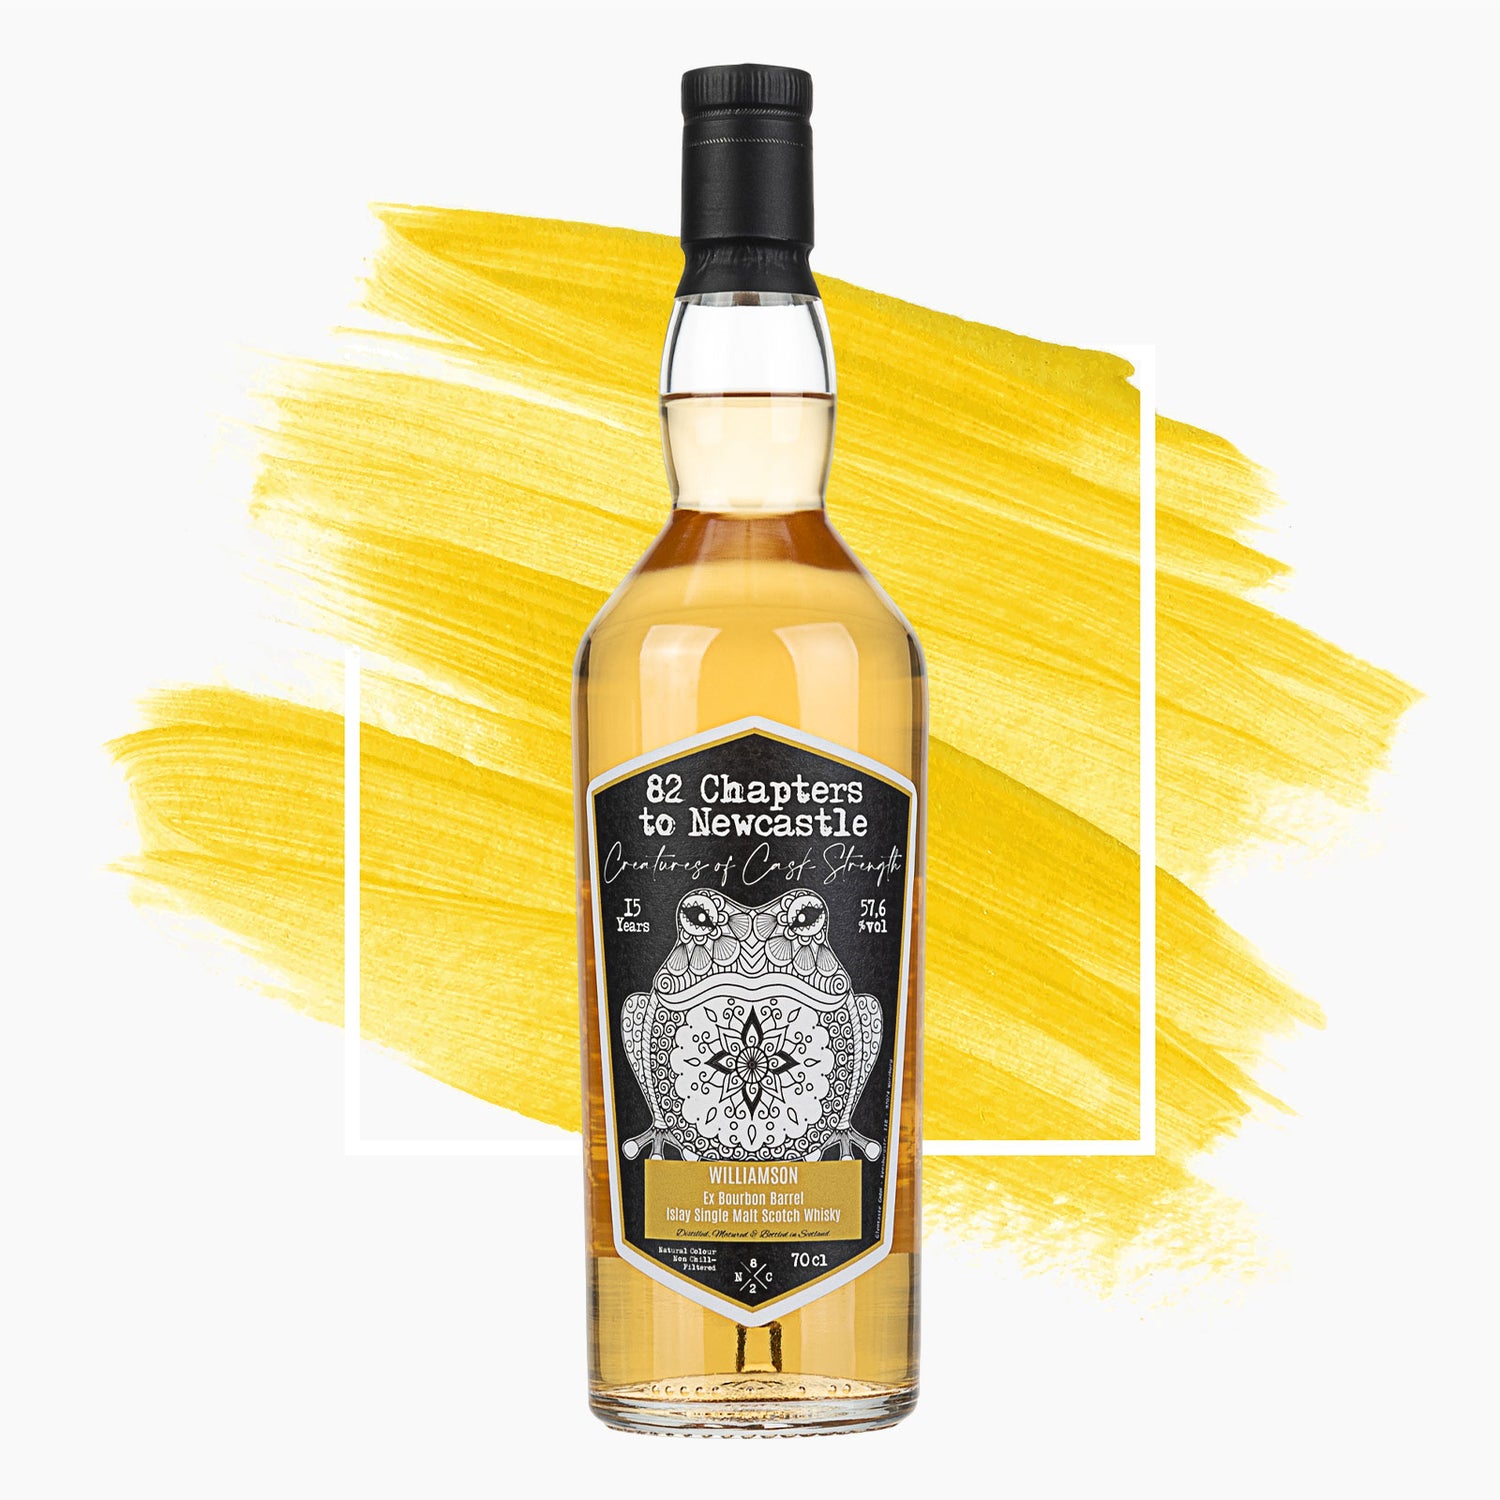 Creatures of Cask Strength Williamson Whiskyflasche